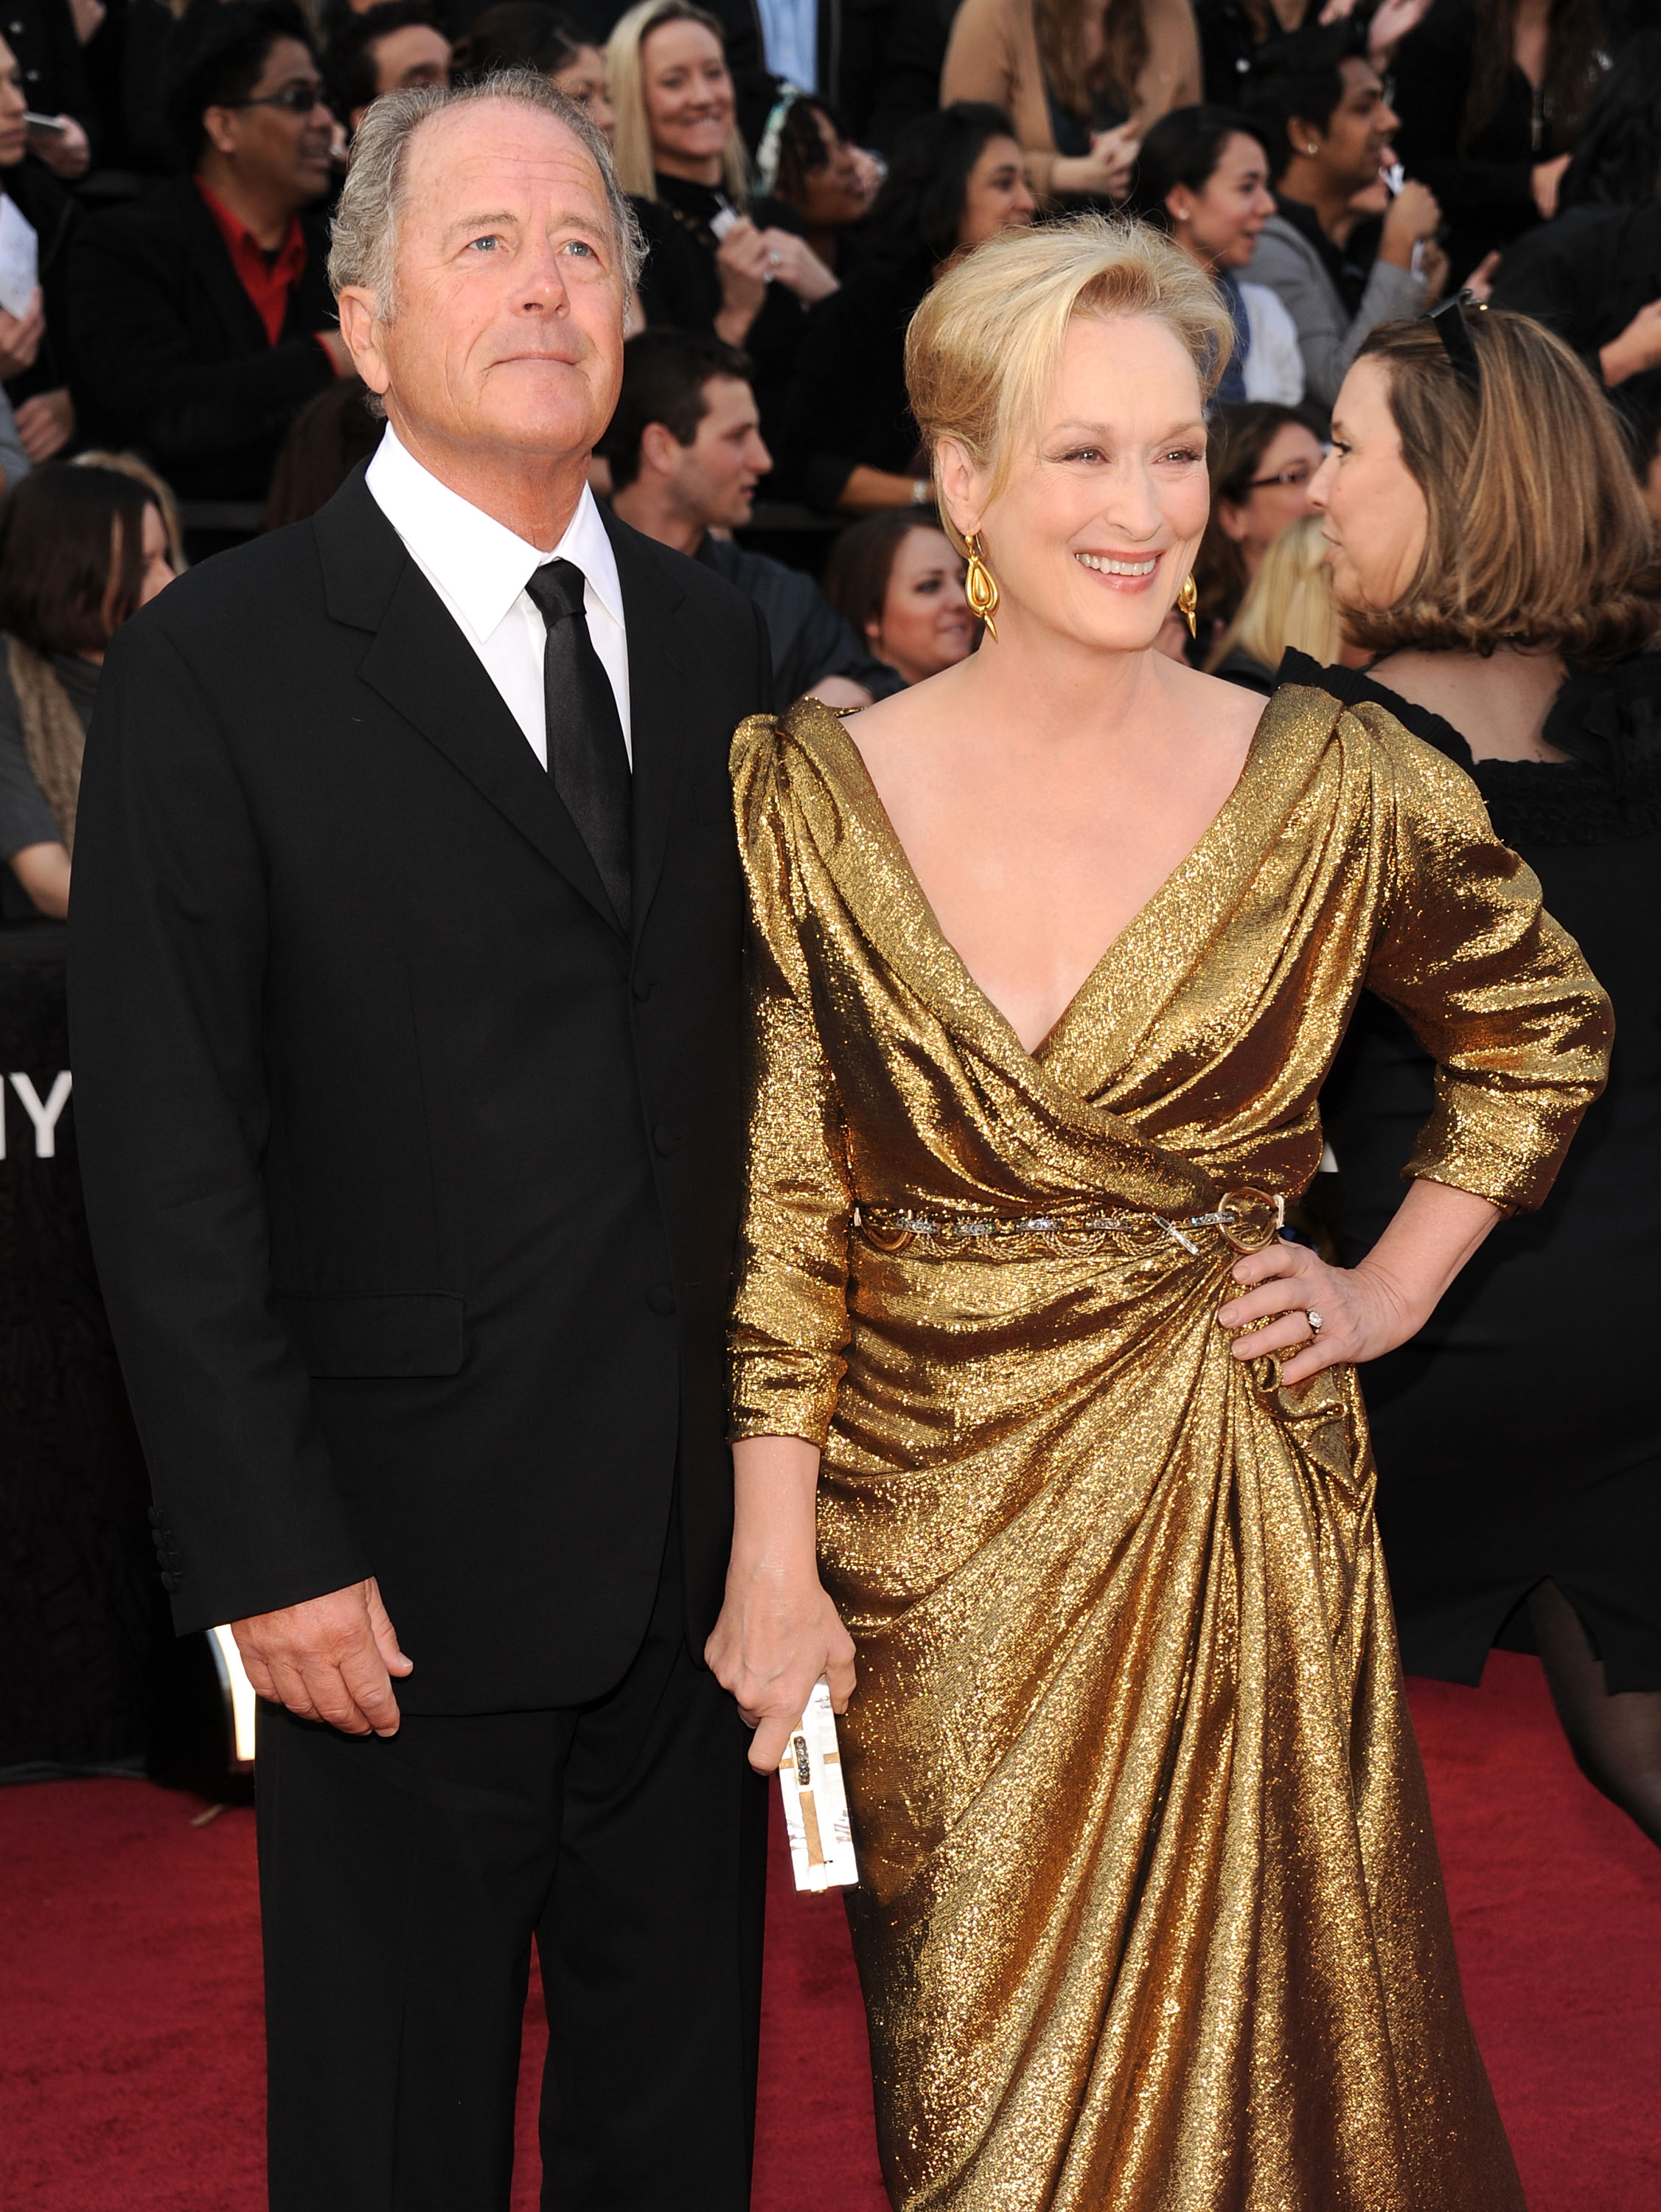 Don Gummer and Meryl Streep at the 84th Annual Academy Awards in Hollywood, California on February 26, 2012 | Source: Getty Images